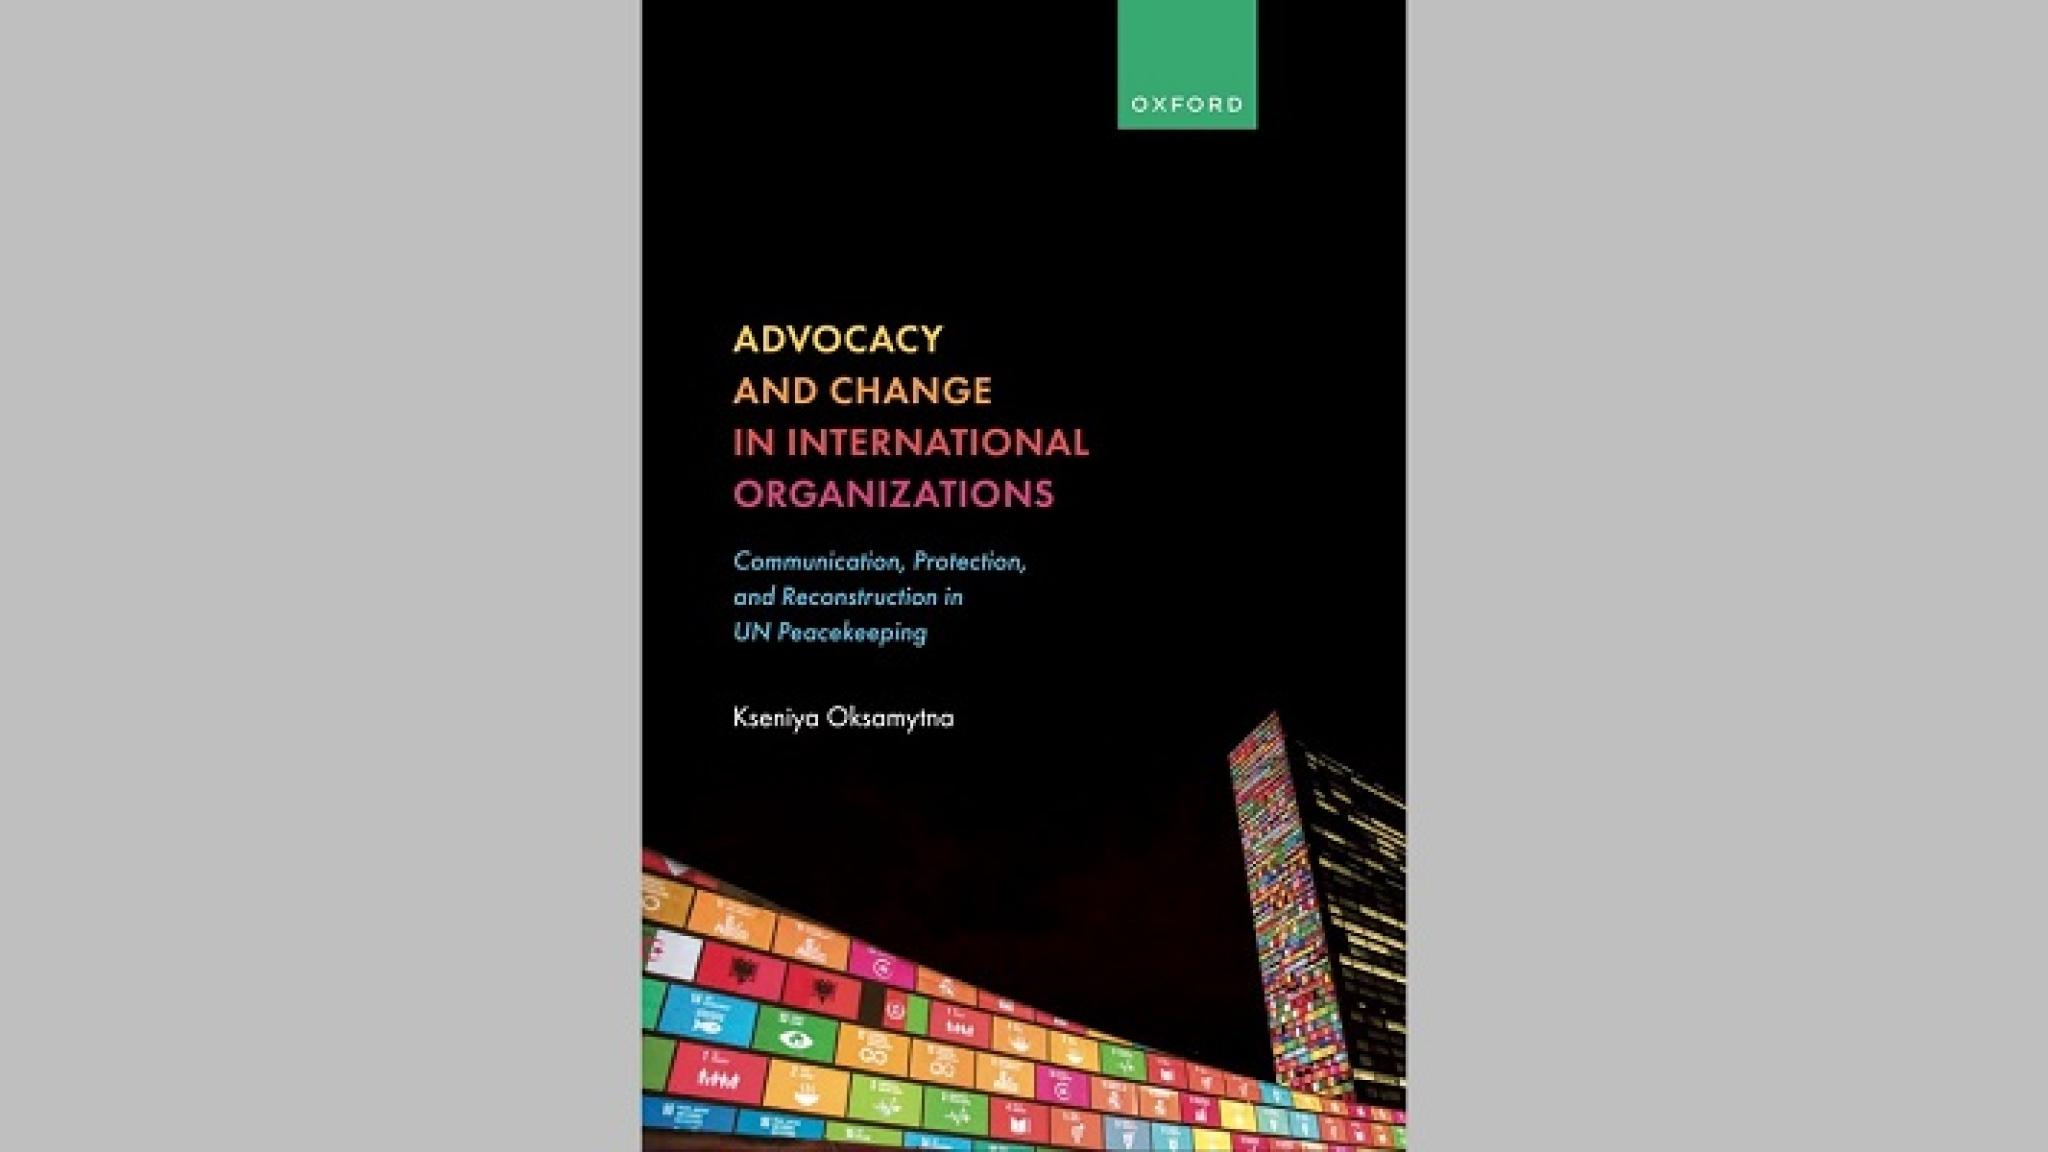 ‘Advocacy and change in international organizations: communication, protection, and reconstruction in UN peacekeeping’ book cover, supplied by the author.